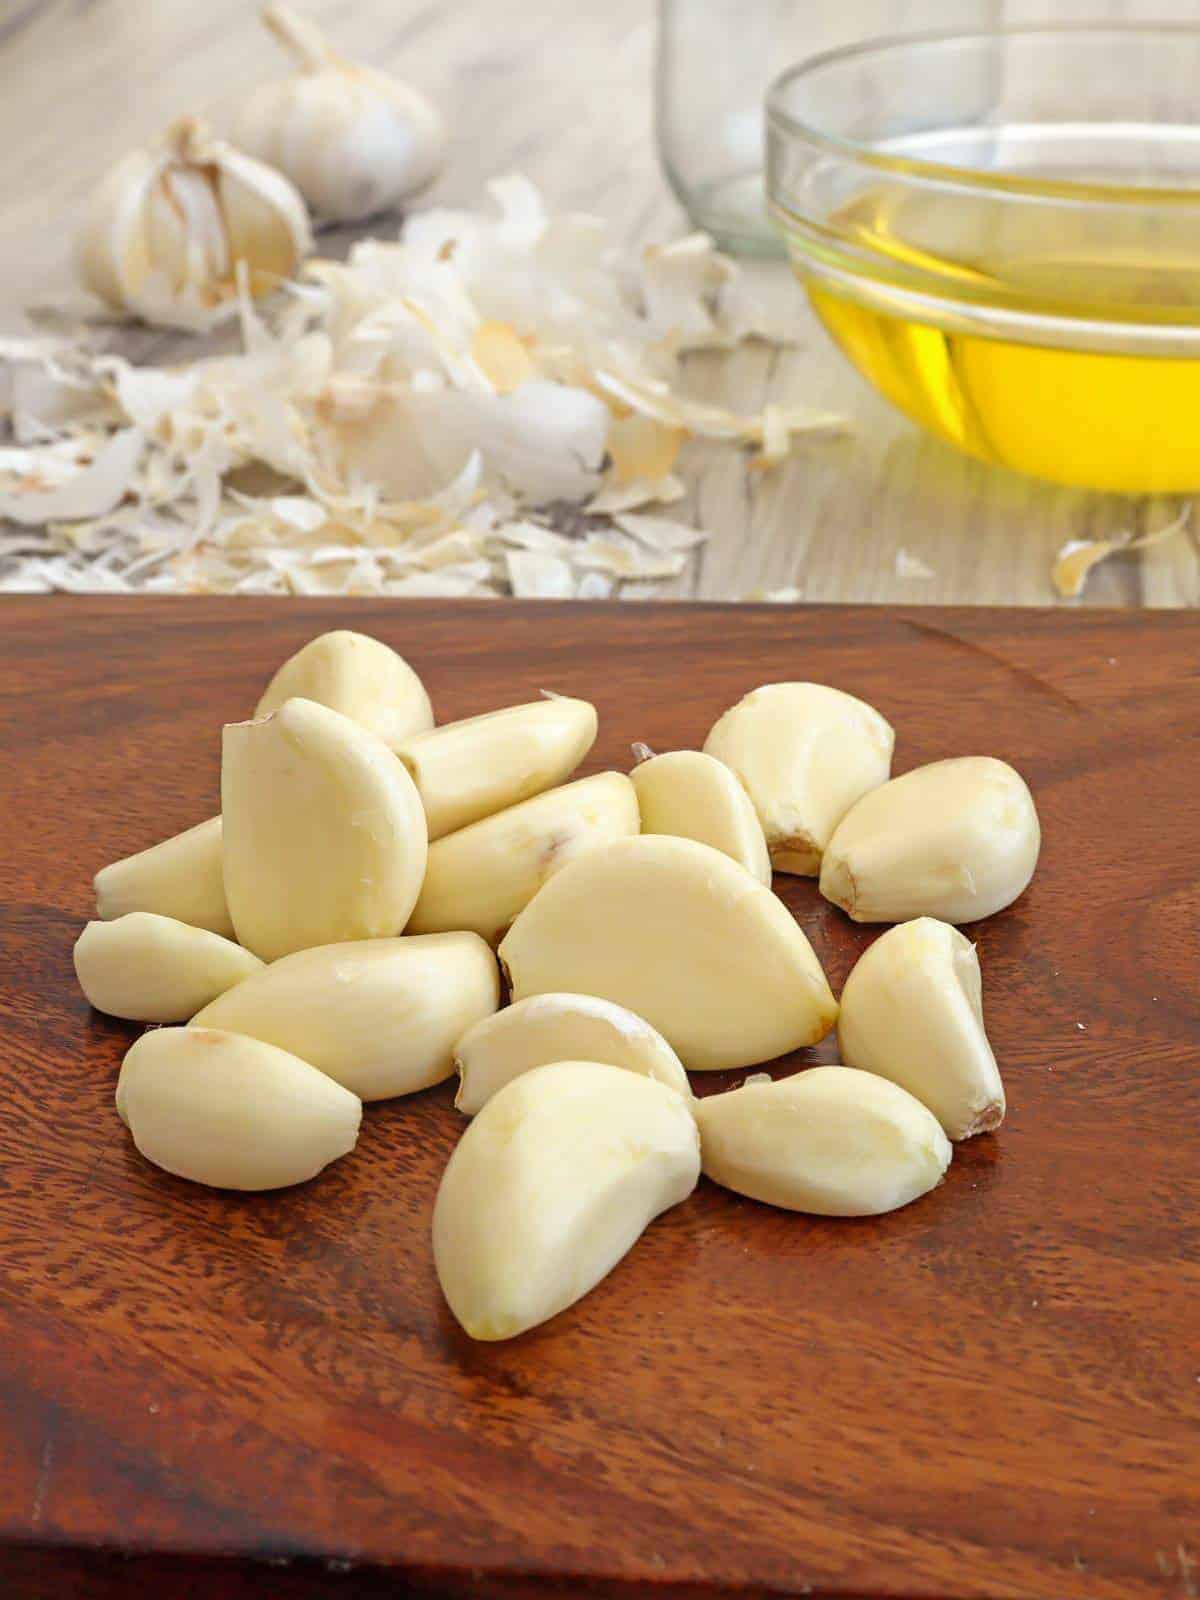 peeled garlic on a cutting board and a bowl of canola oil on the side